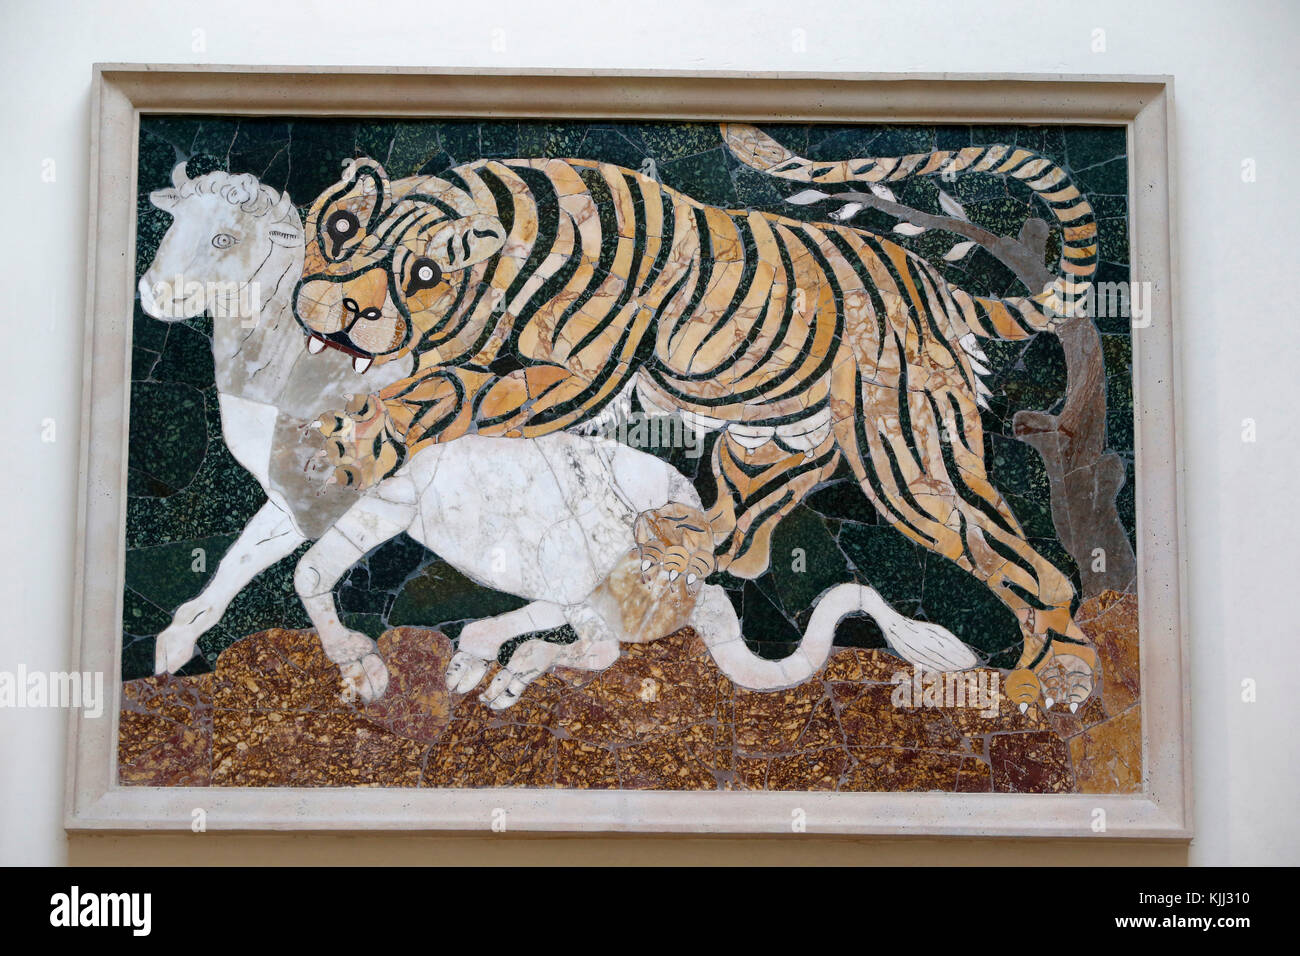 Capitoline museum, Rome. Panel in opus sectile with tiger assaulting a calf. Mosaic / Intarsia. Second quarter of 4th century AD. Coloured marbles Ita Stock Photo